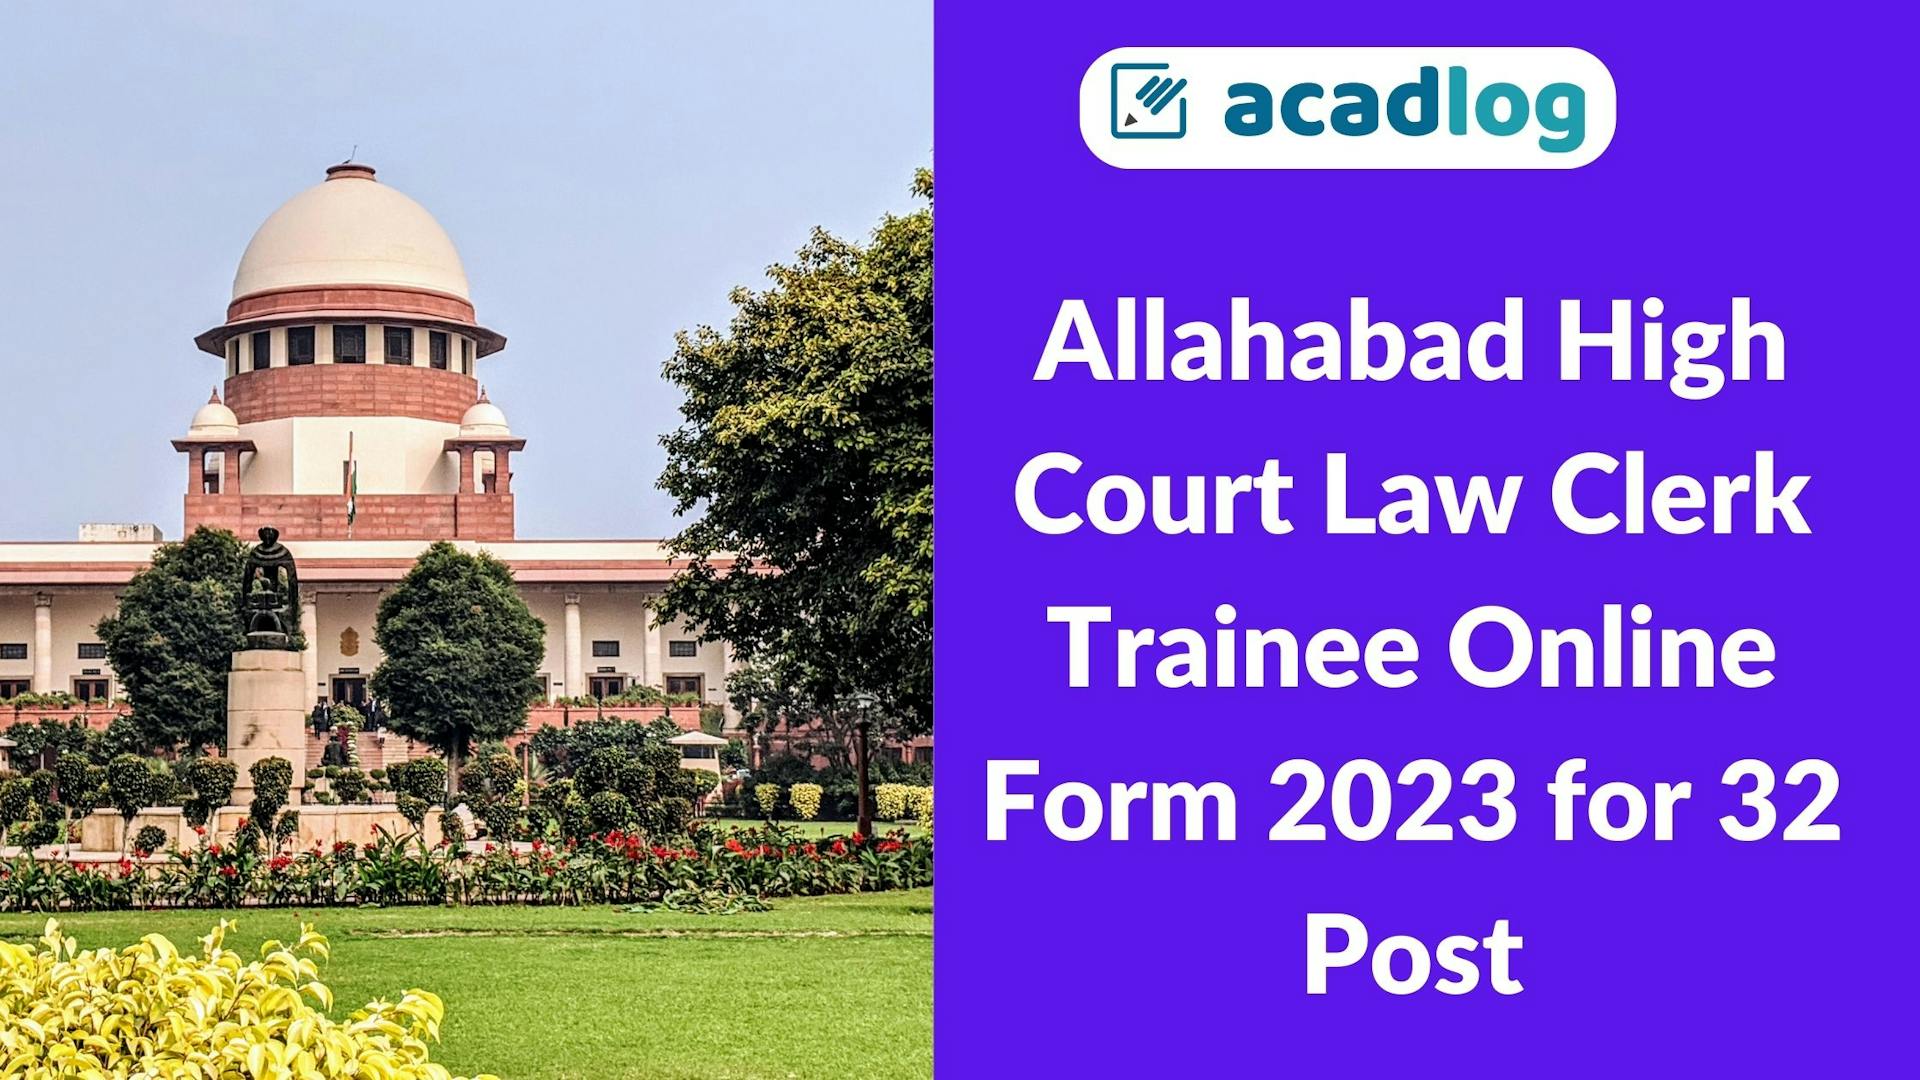 Allahabad High Court Law Clerk Trainee Recruitment 2023 Online Form for 32 Post